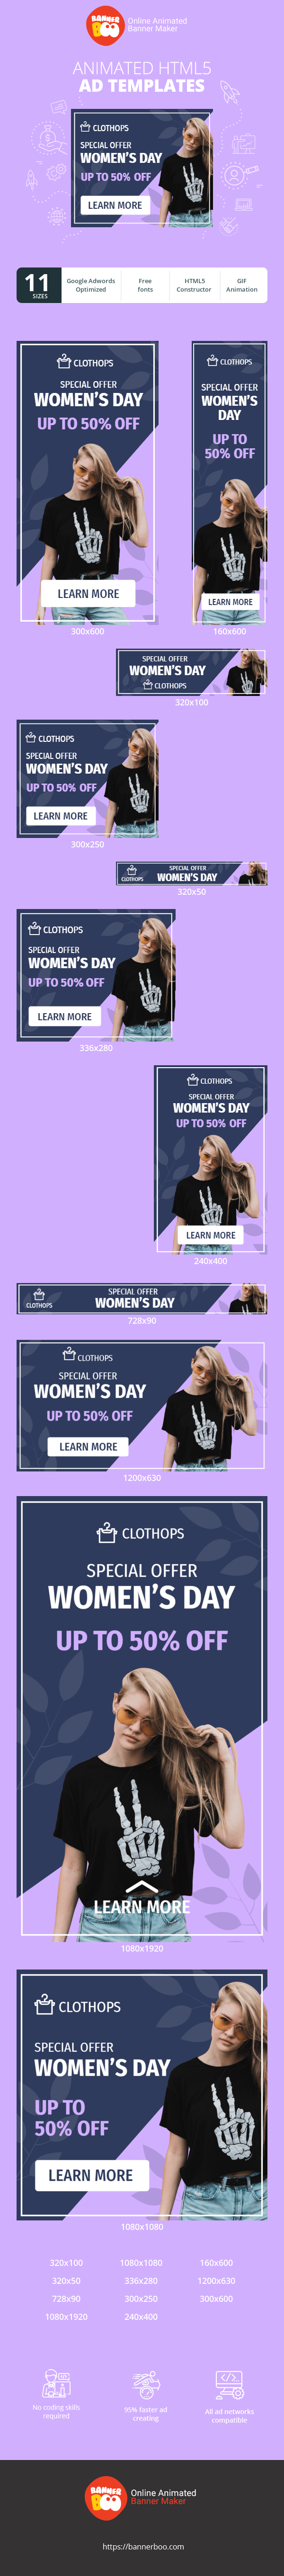 Banner ad template — Womens Day — Special Offer Up To 50% Off